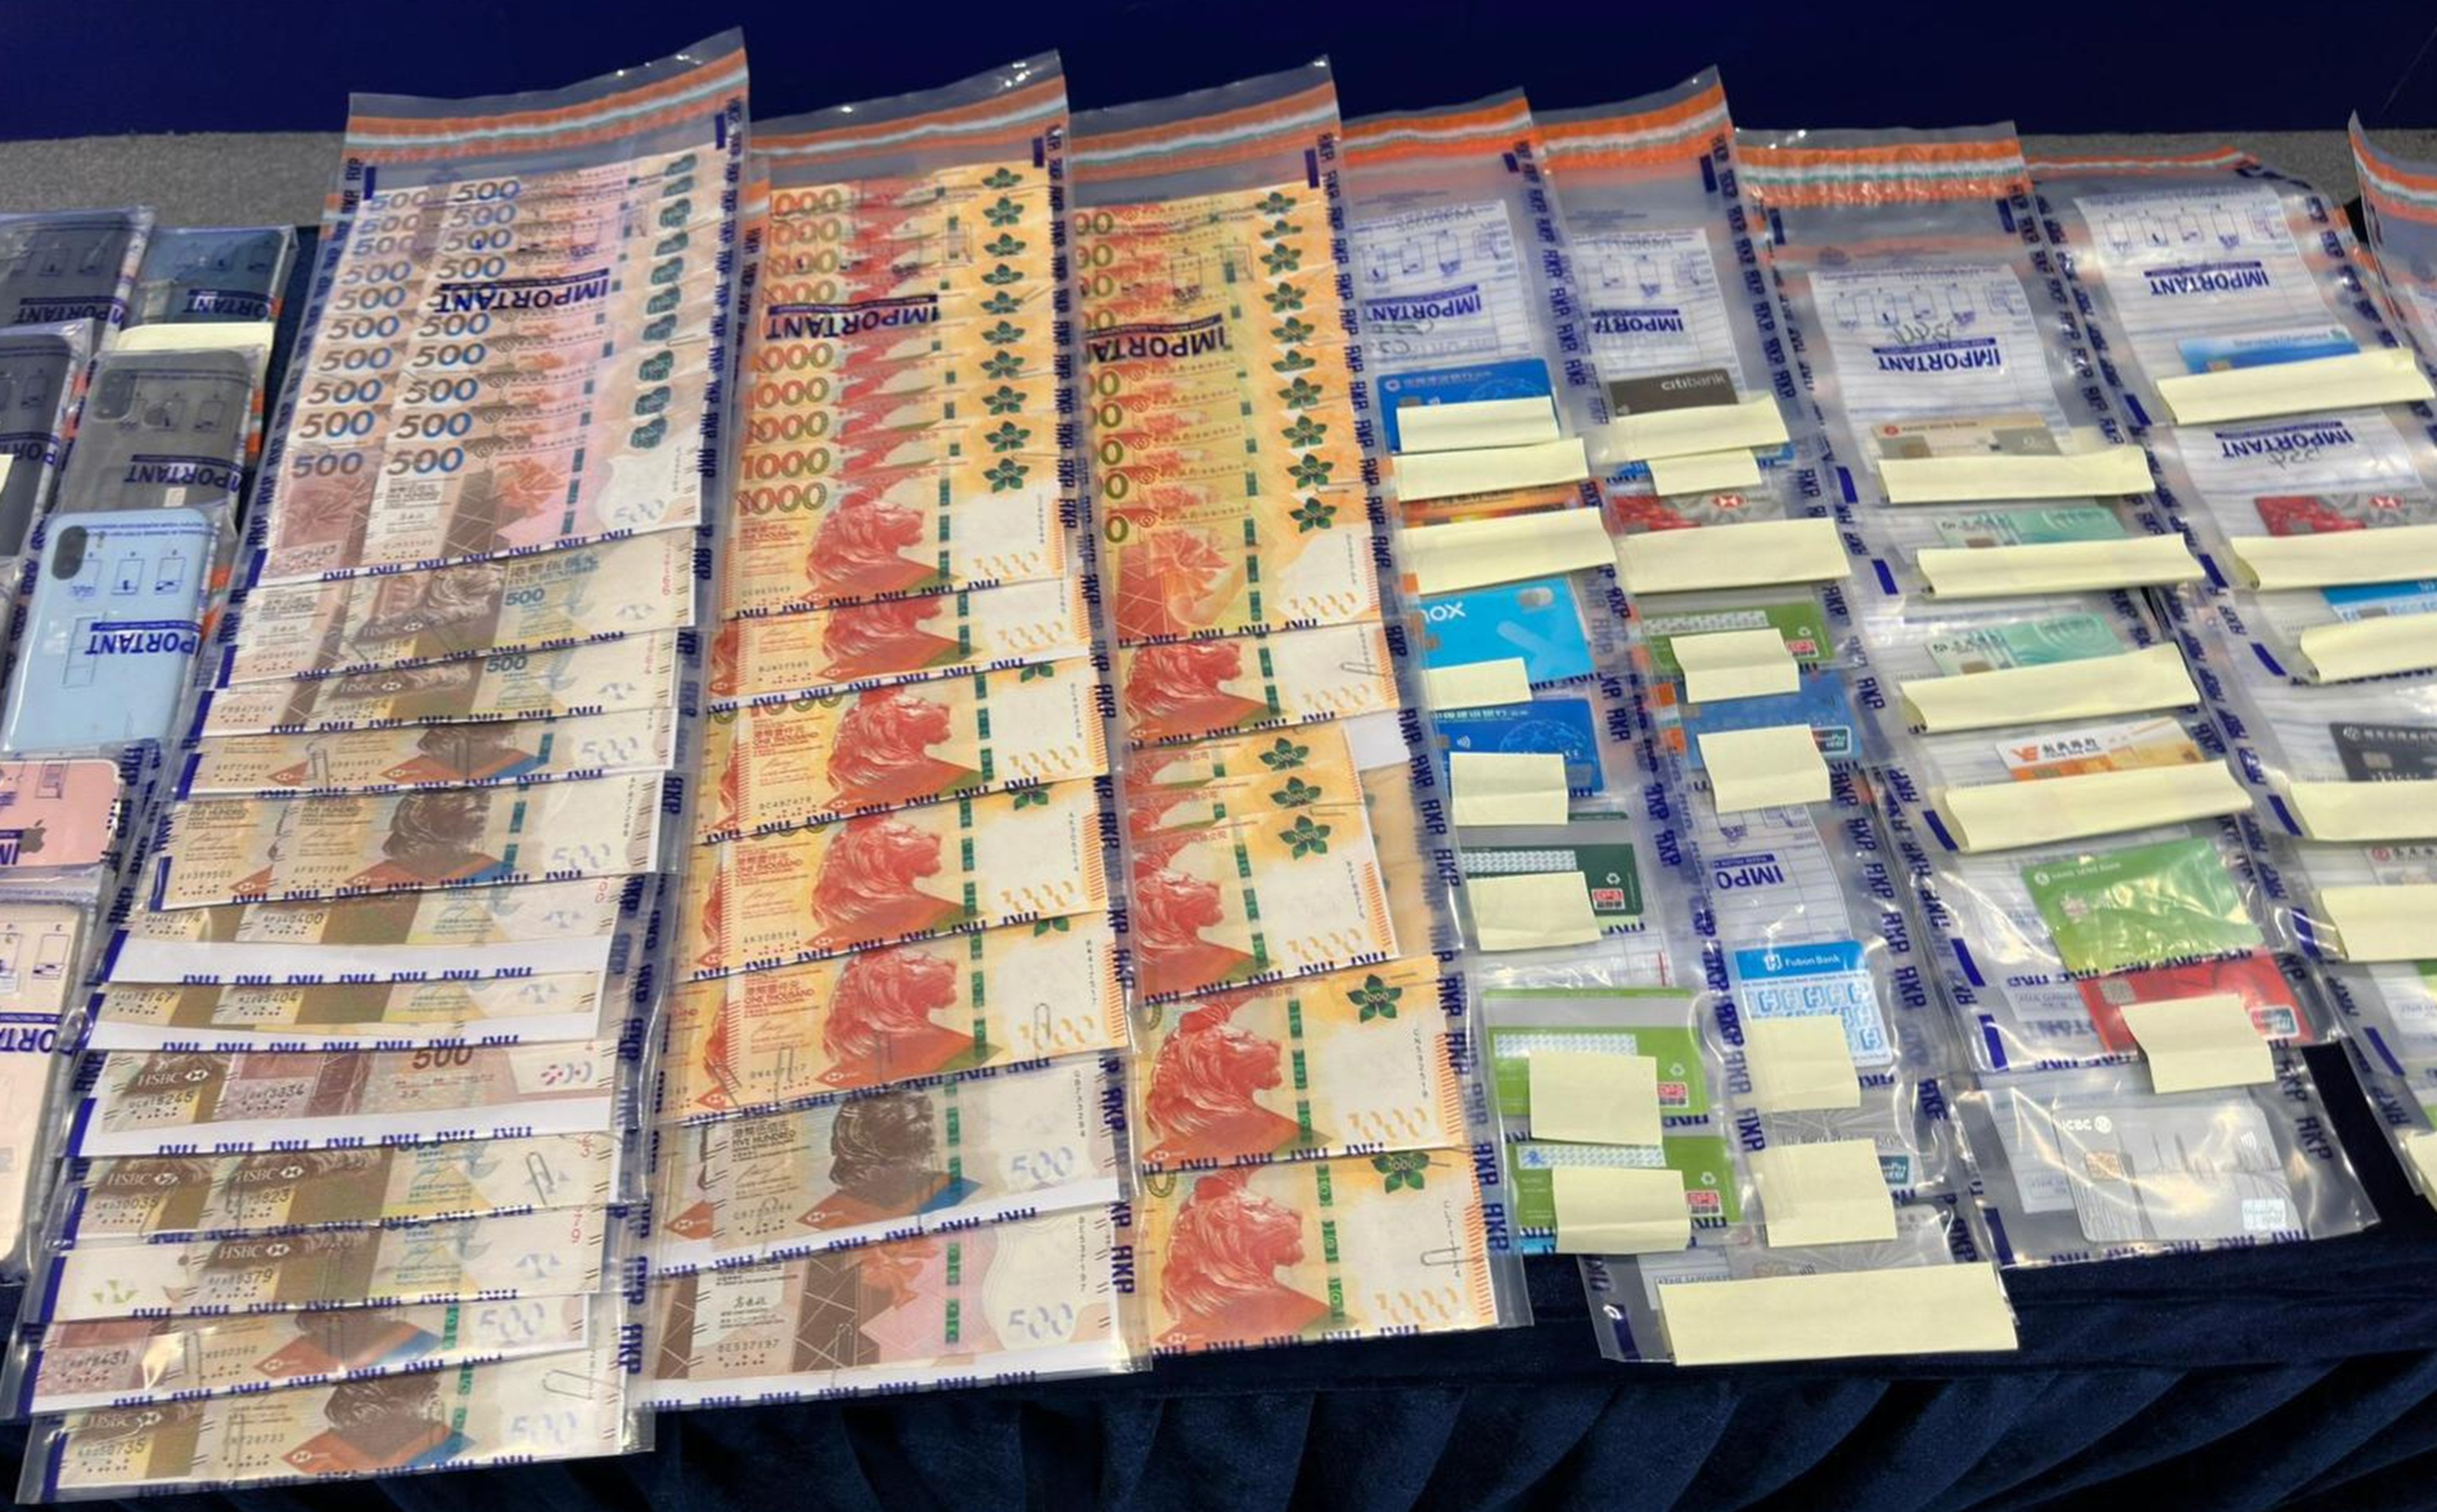 Evidence seized in the operation. Officers have confiscated HK$330,000 in cash, 57 bank cards and 40 mobile phones, among other items. Photo: Handout